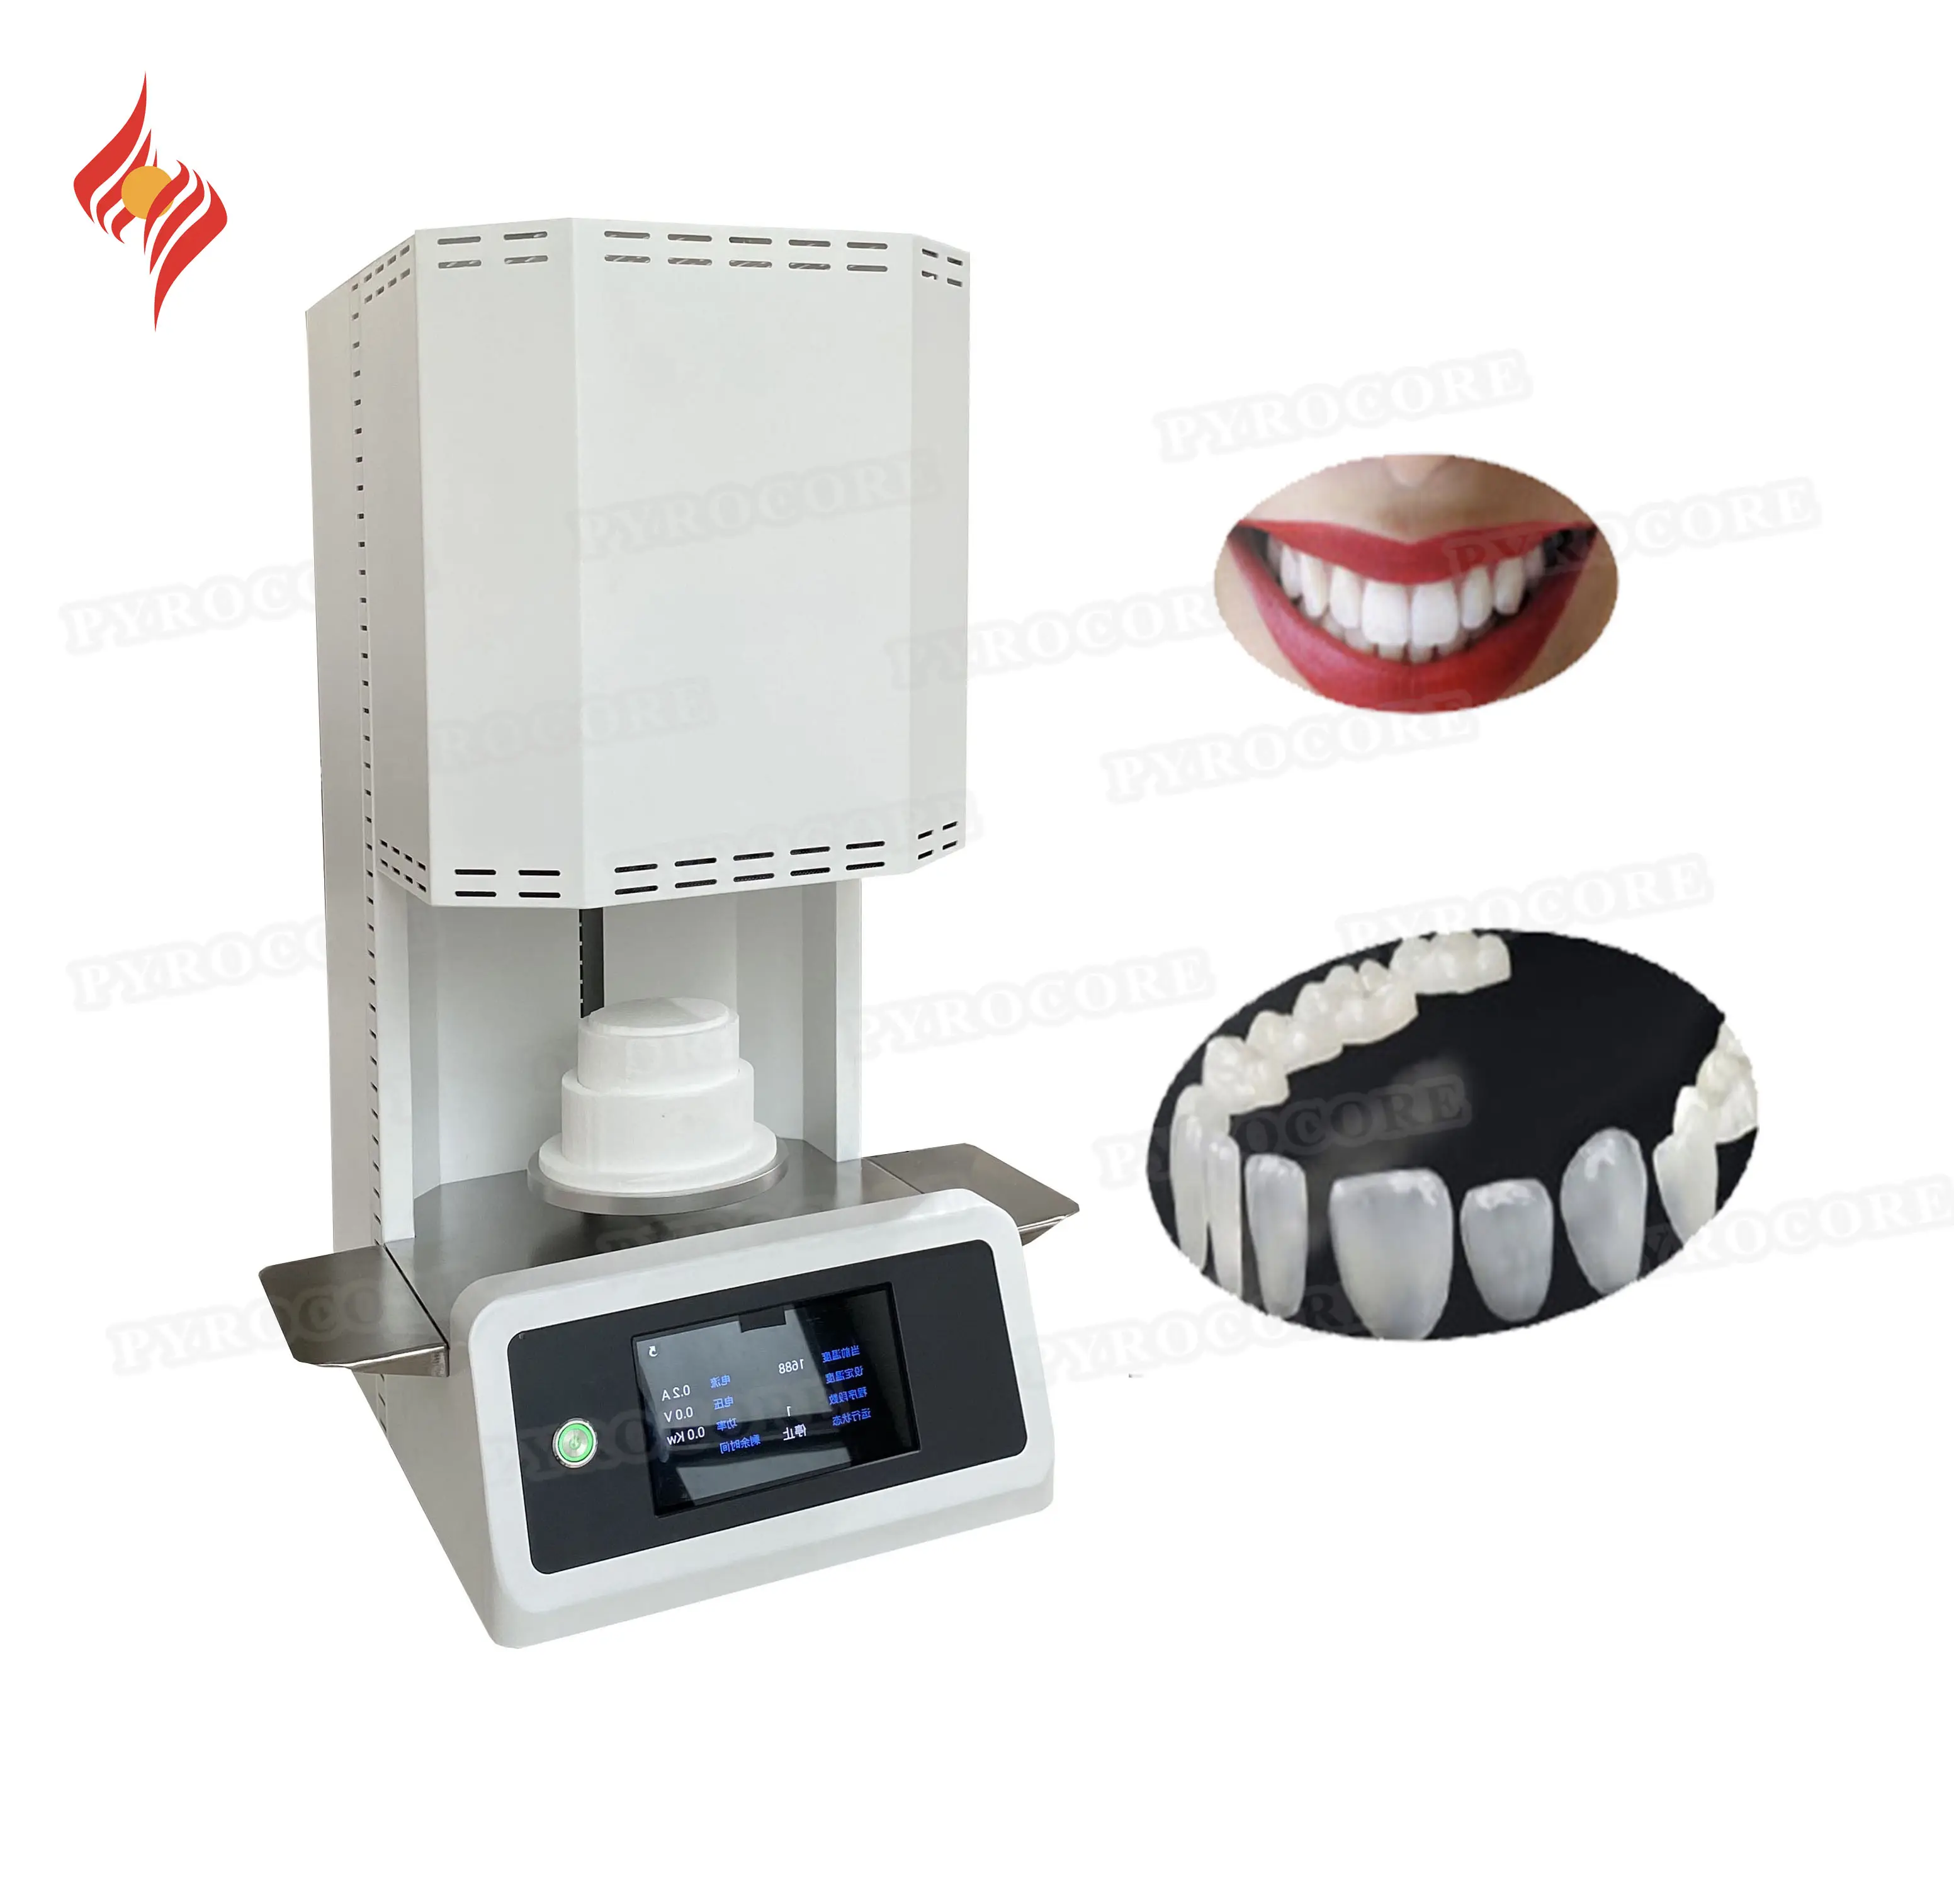 Energy Saving 1700c Lab Heating Evenly Crucible Zirconia Sintering Dental Furnace With Automatic Lift